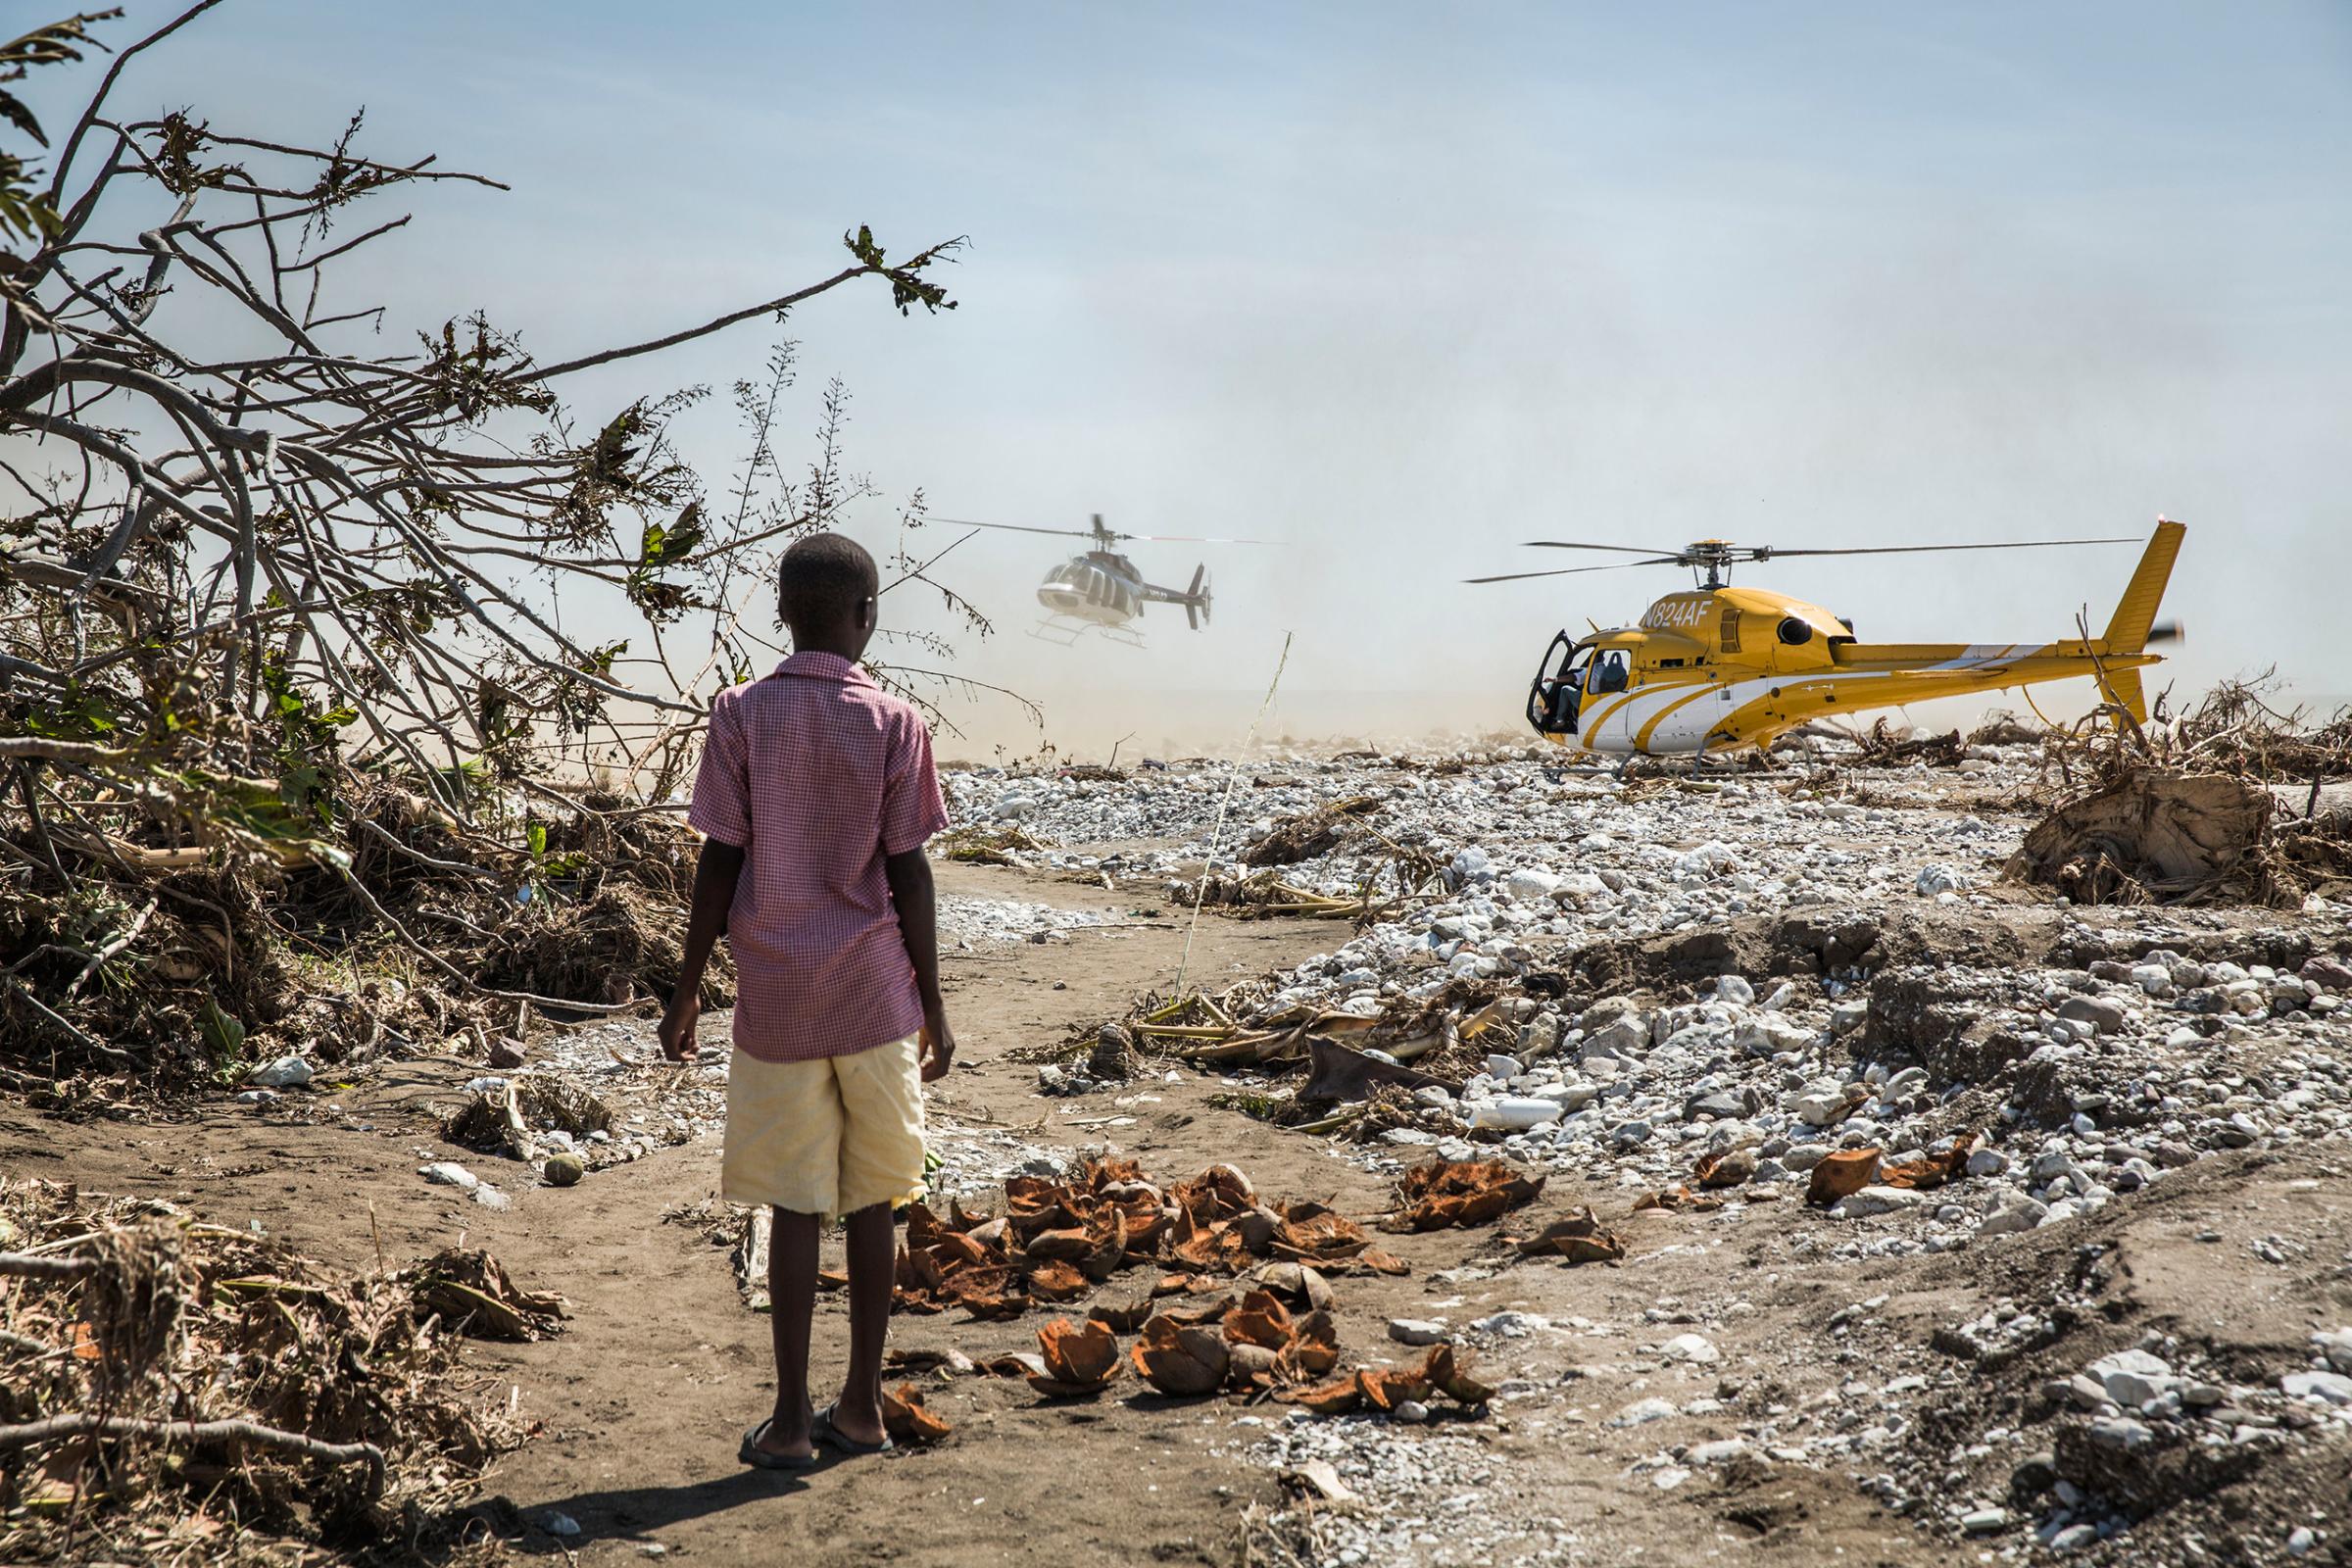 A young boy watches helicopters carrying politicians to the worst hit areas land in Roche-a-Bateau, southwestern Haiti, on Oct. 8, 2016.